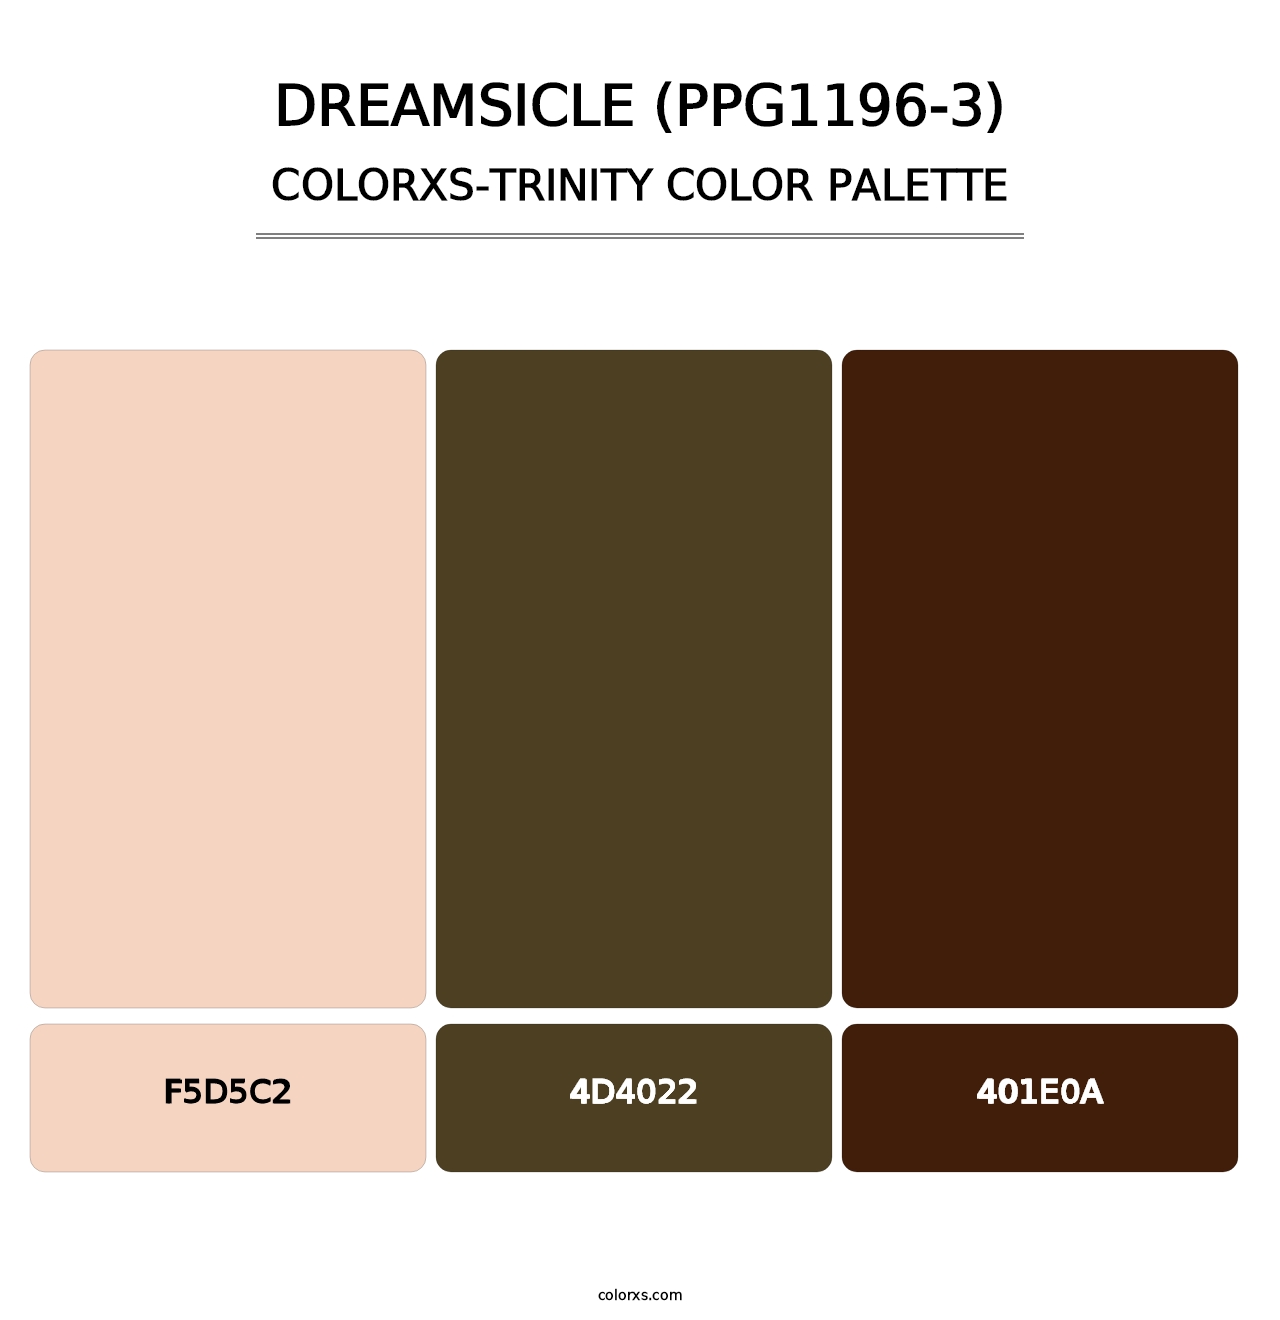 Dreamsicle (PPG1196-3) - Colorxs Trinity Palette